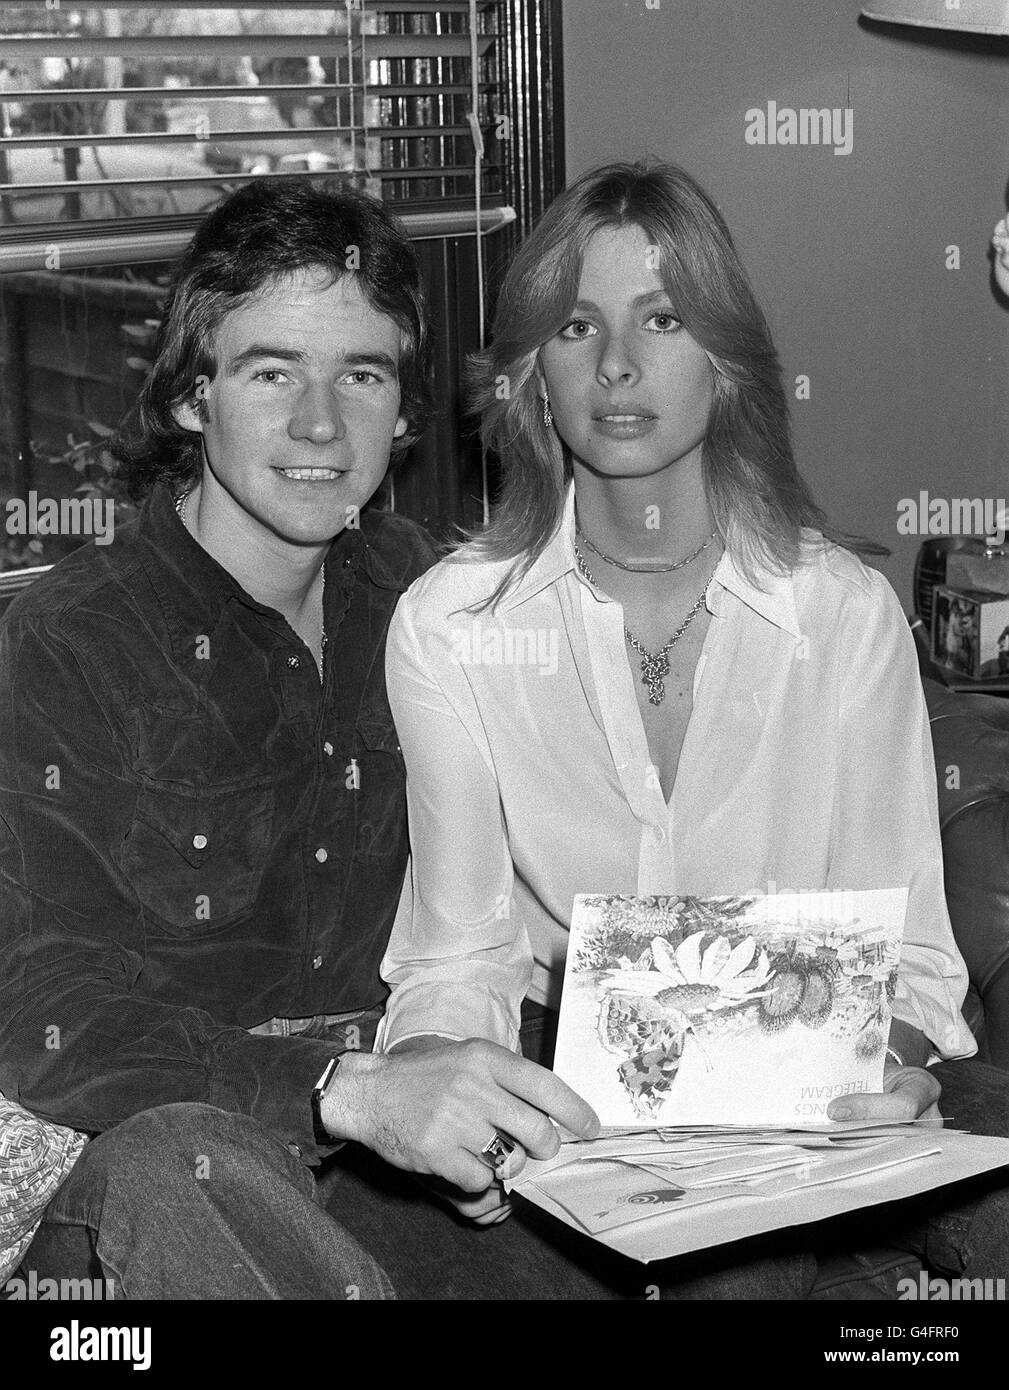 PA NEWS PHOTO 31/12/77 BARRY SHEENE AND HIS GIRLFRIEND STEPHANIE MCLEAN AT HIS LONDON HOME Stock Photo